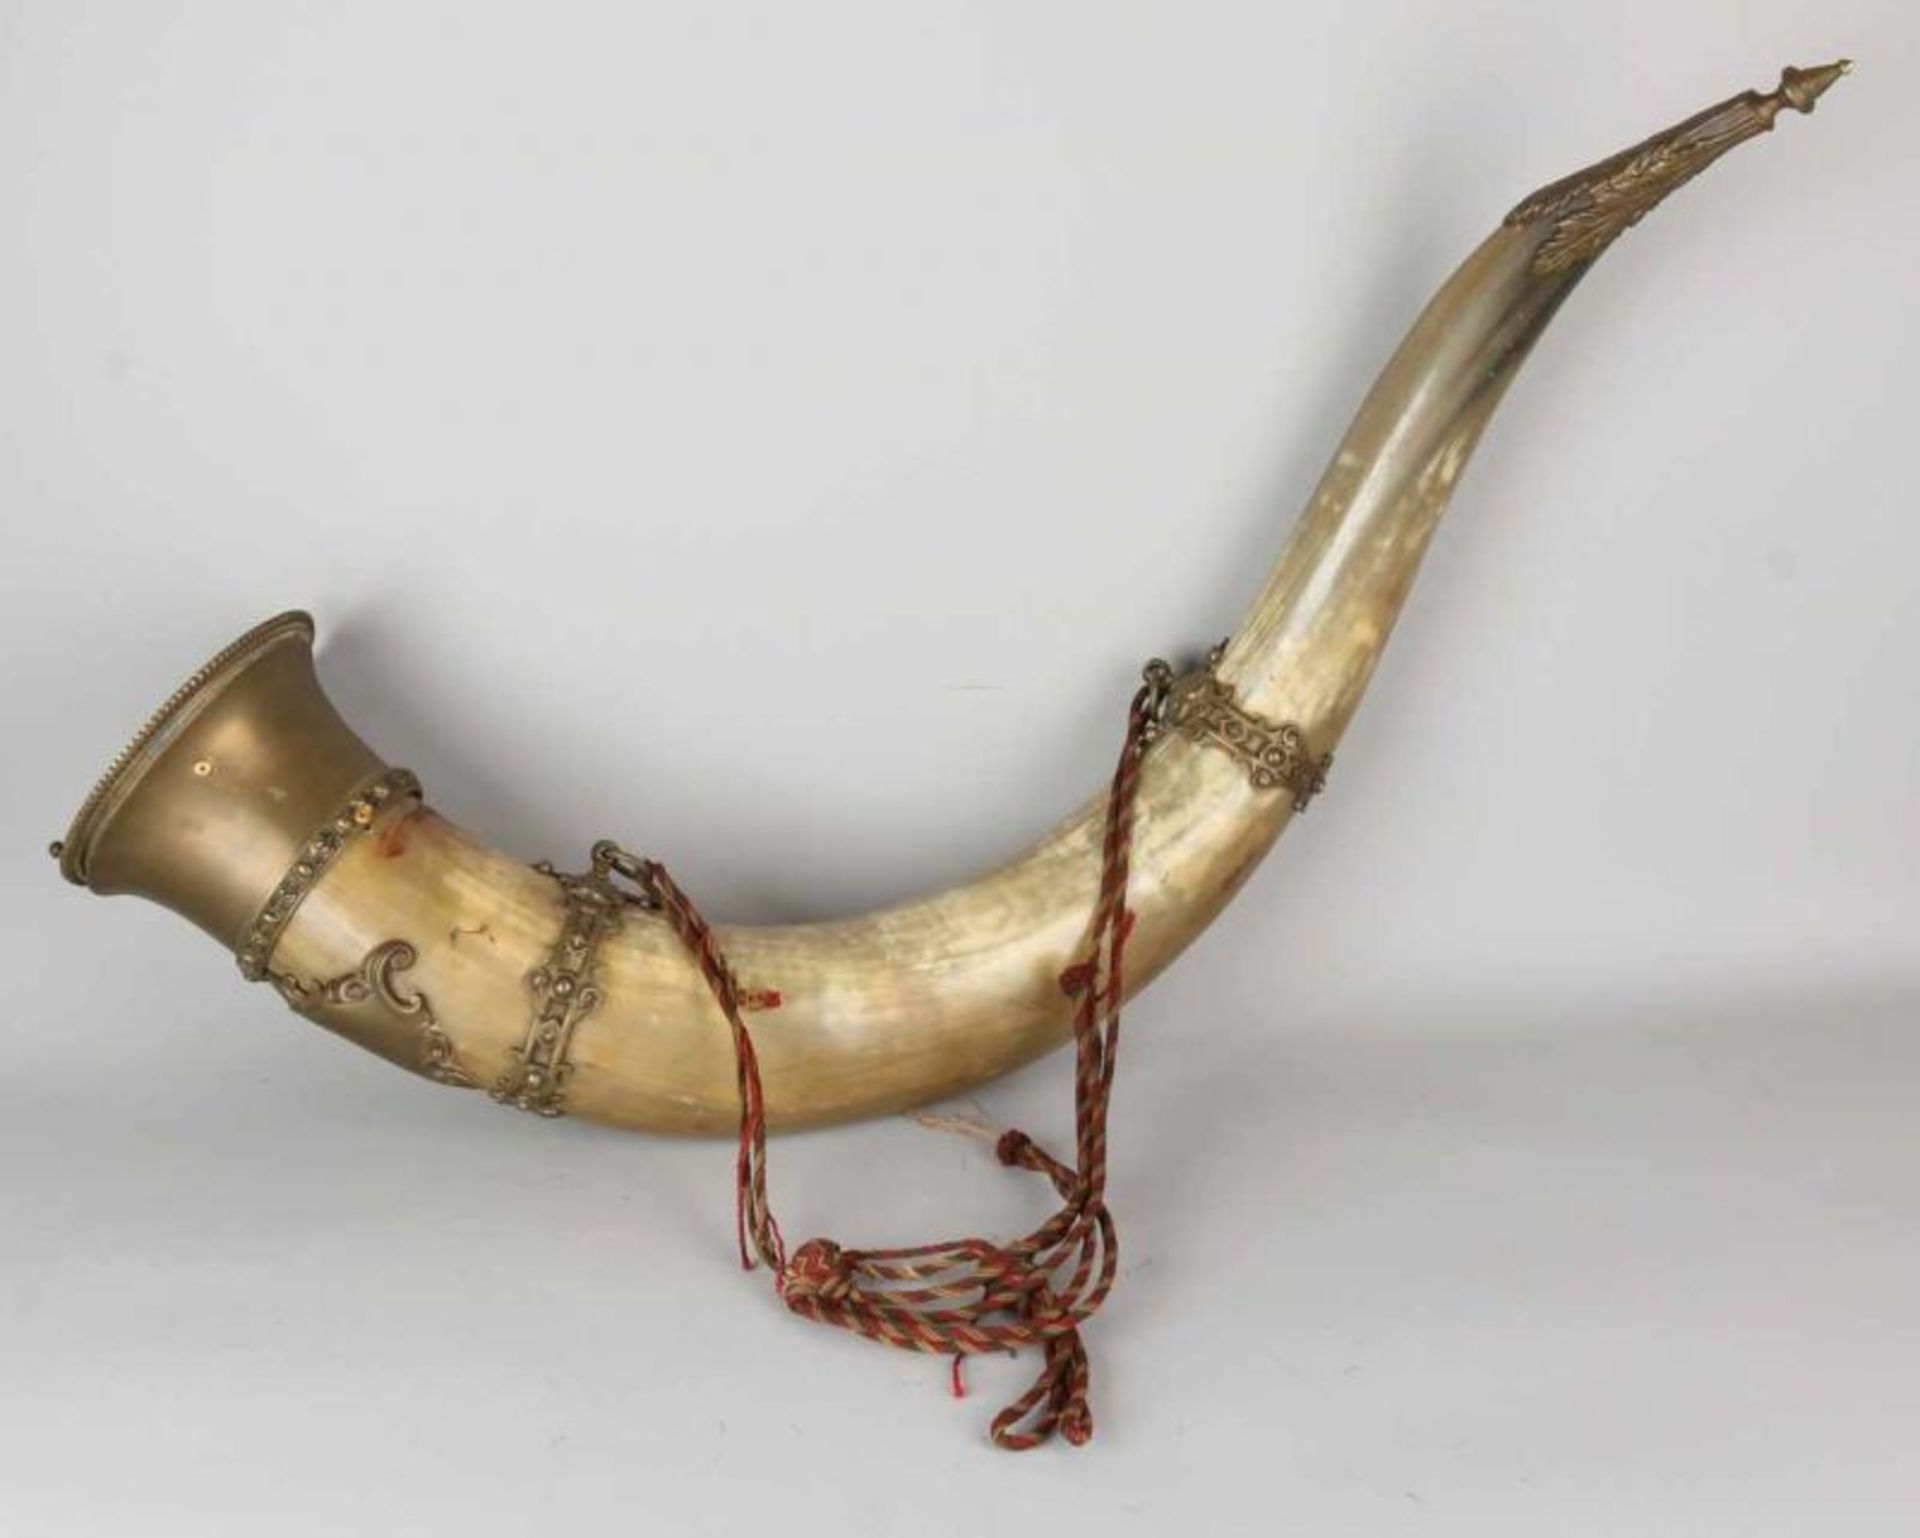 Very large antique German Horn of plenty. With bronze decorations. 'The Vererlichen Corps